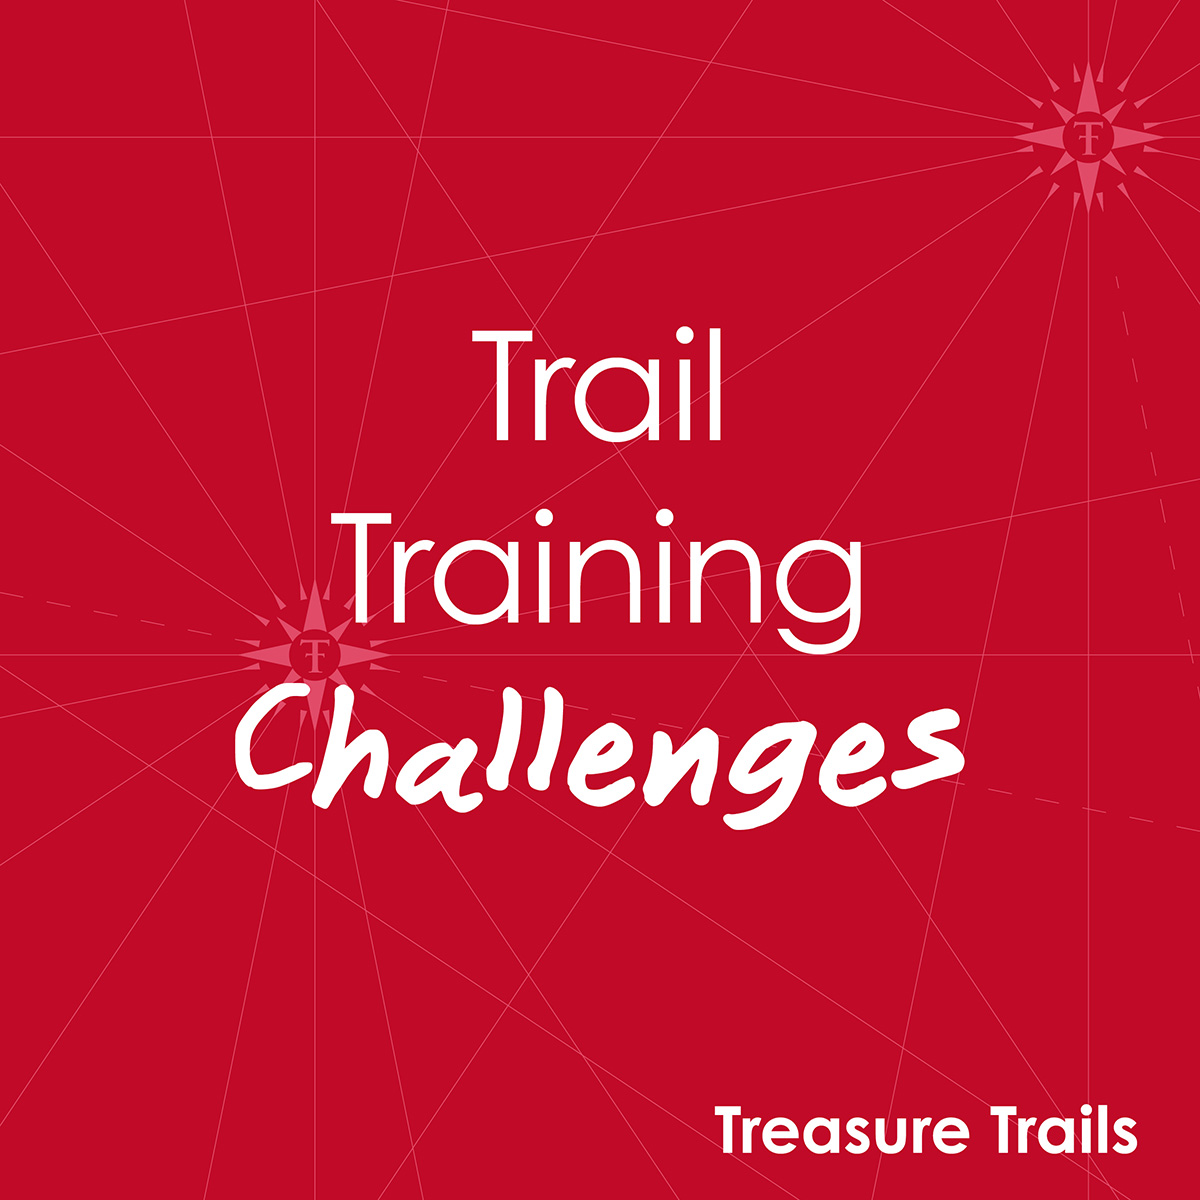 Trail training challenges from Treasure Trails